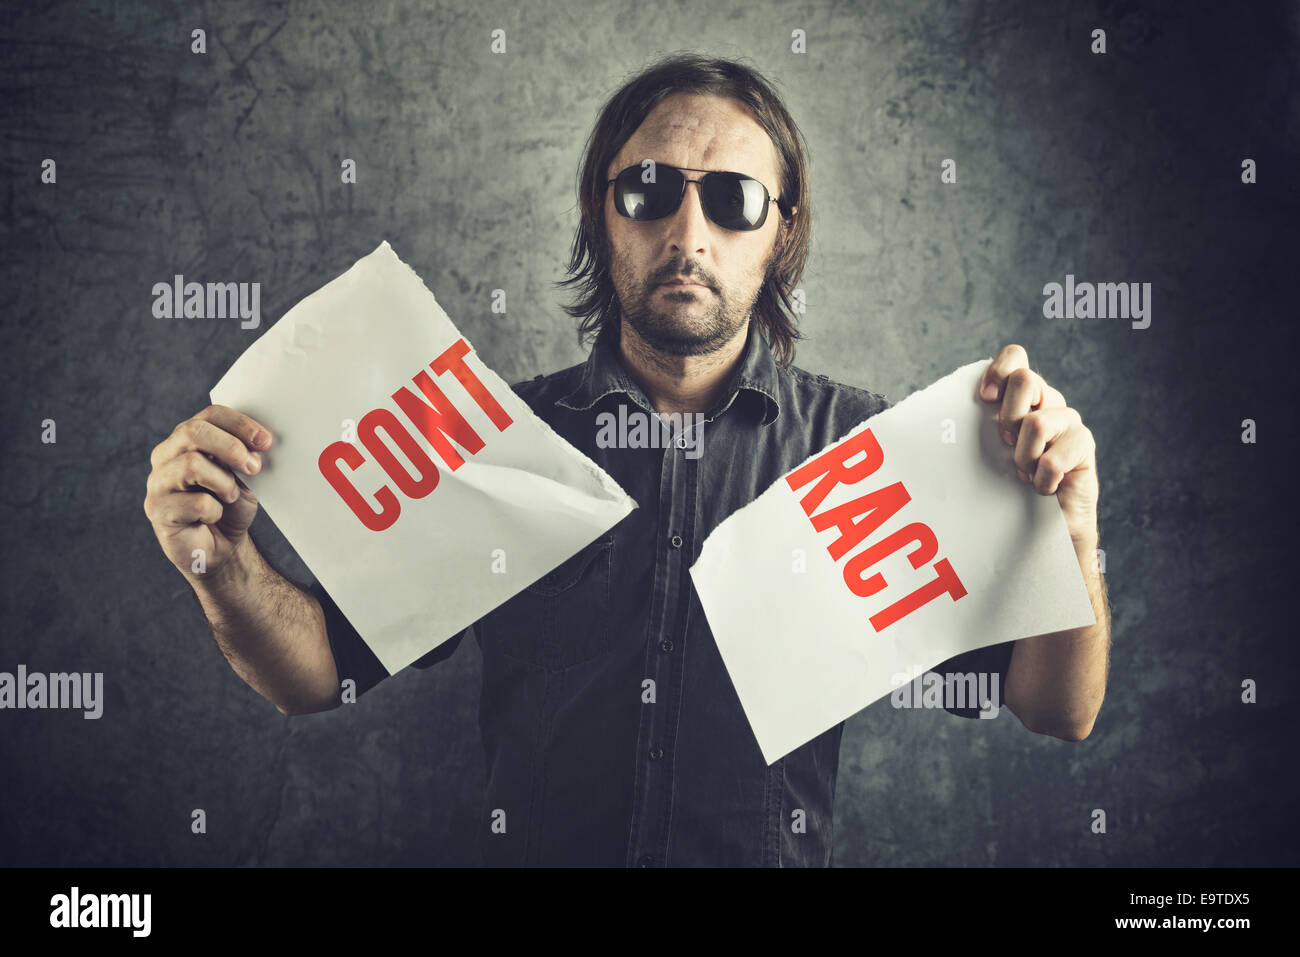 Man tearing apart contract document paper as a gesture of agreement cancellation. Stock Photo